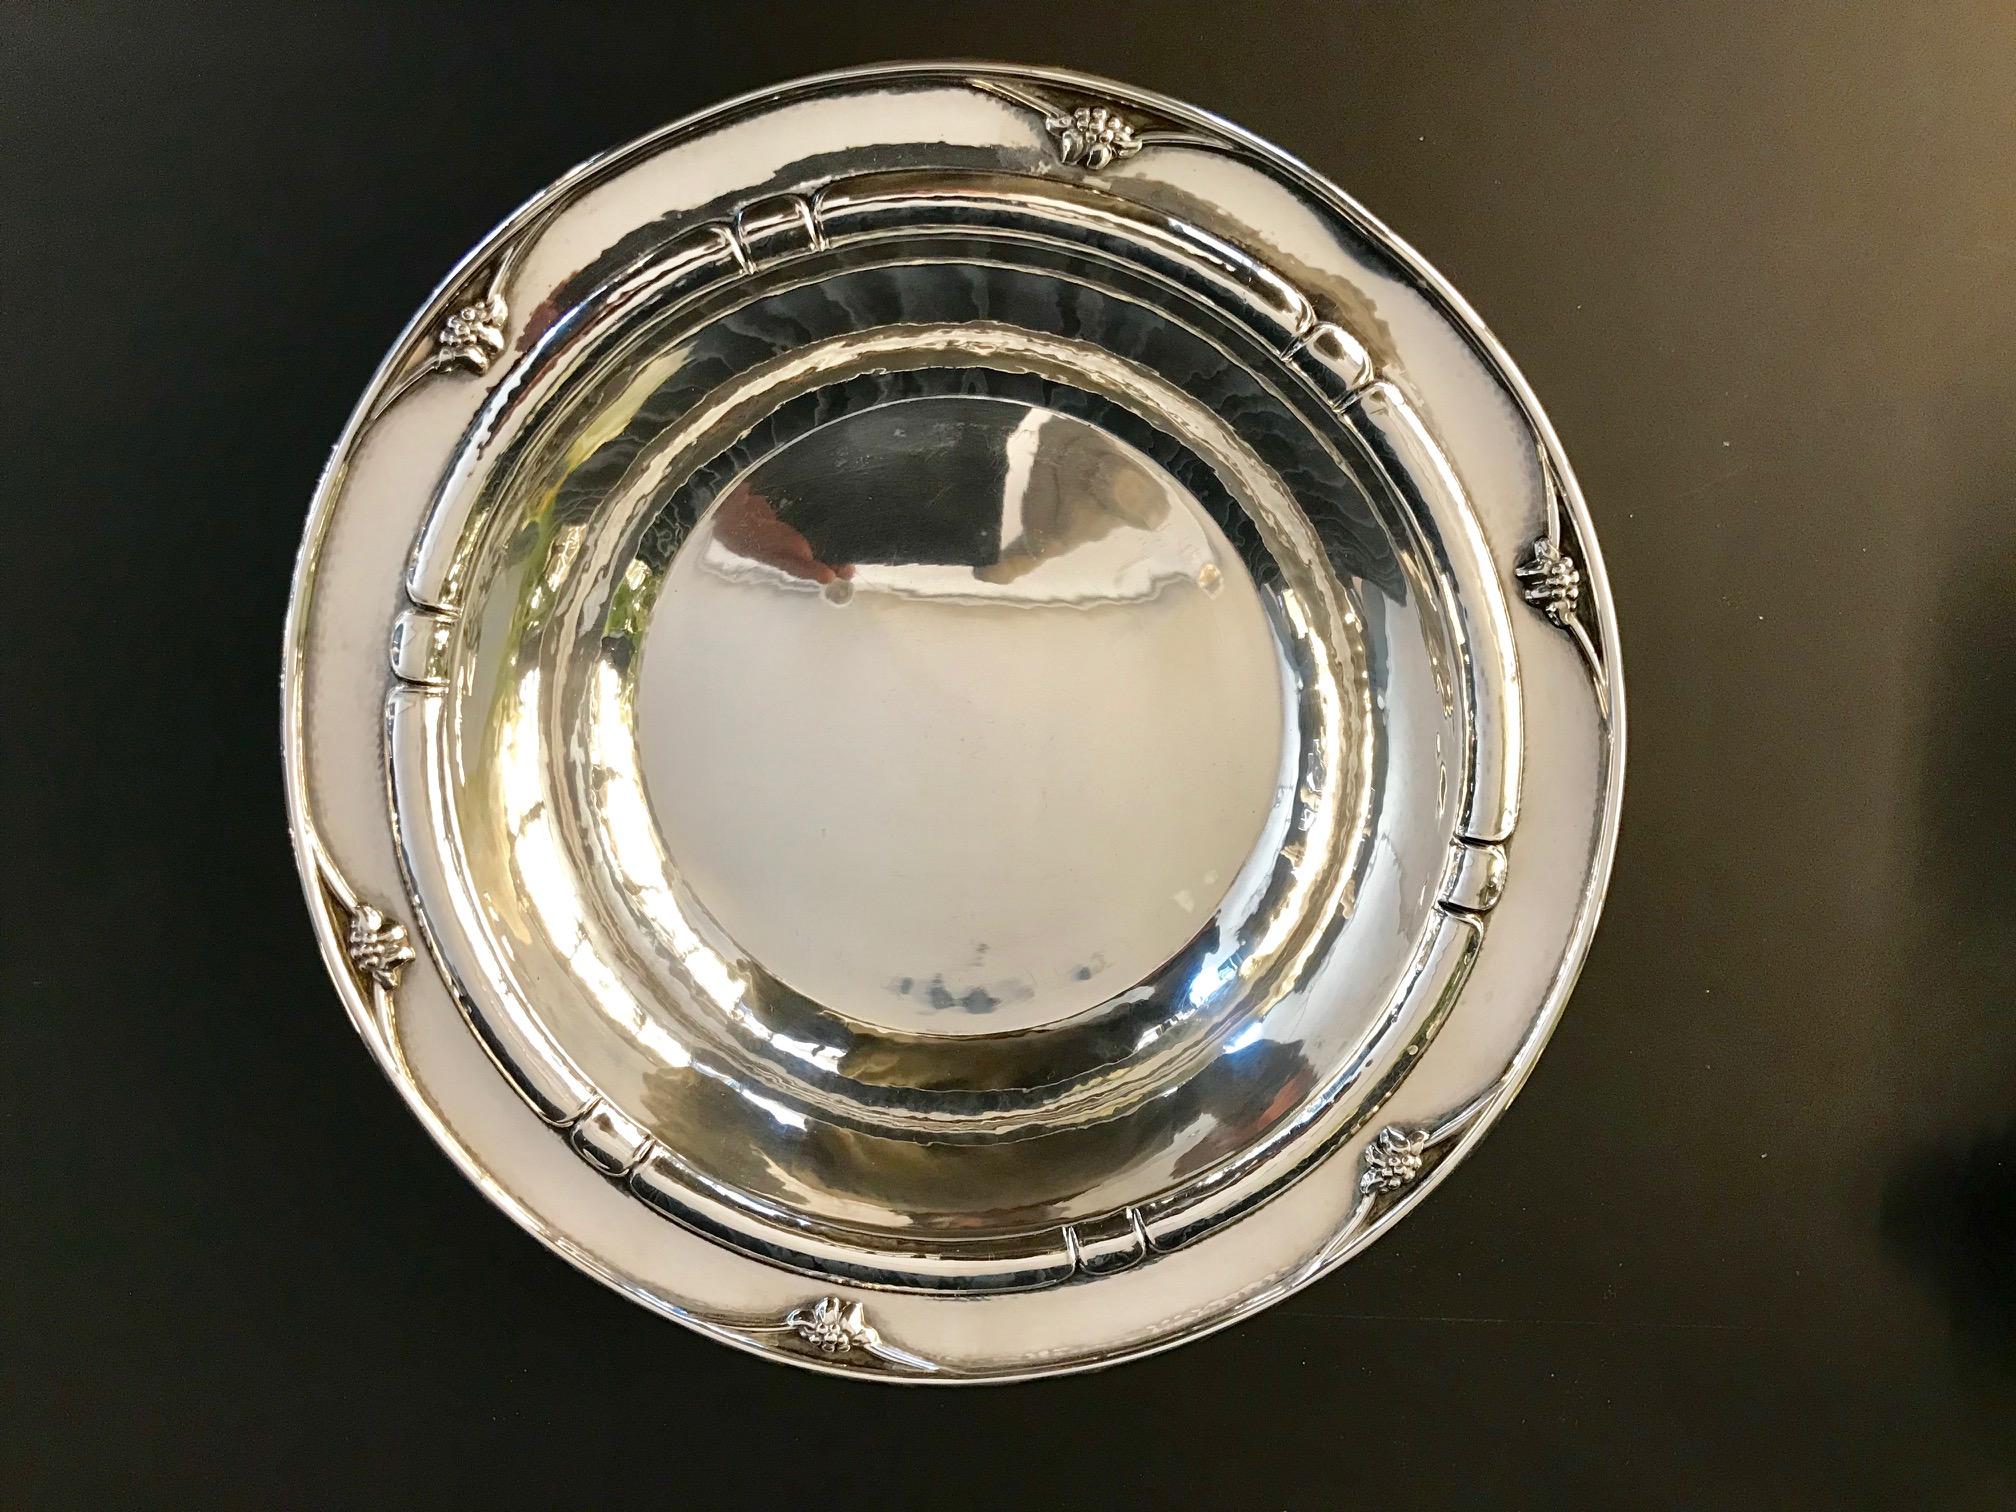 This is a sterling silver Georg Jensen bowl with stylistic berry decorations on the rim, design #271D by Georg Jensen.

Measures: 2½” in height and 10 9/16? in diameter at the rim (6.4cm, 26.8cm).

Vintage Georg Jensen hallmarks from 1925-1932.